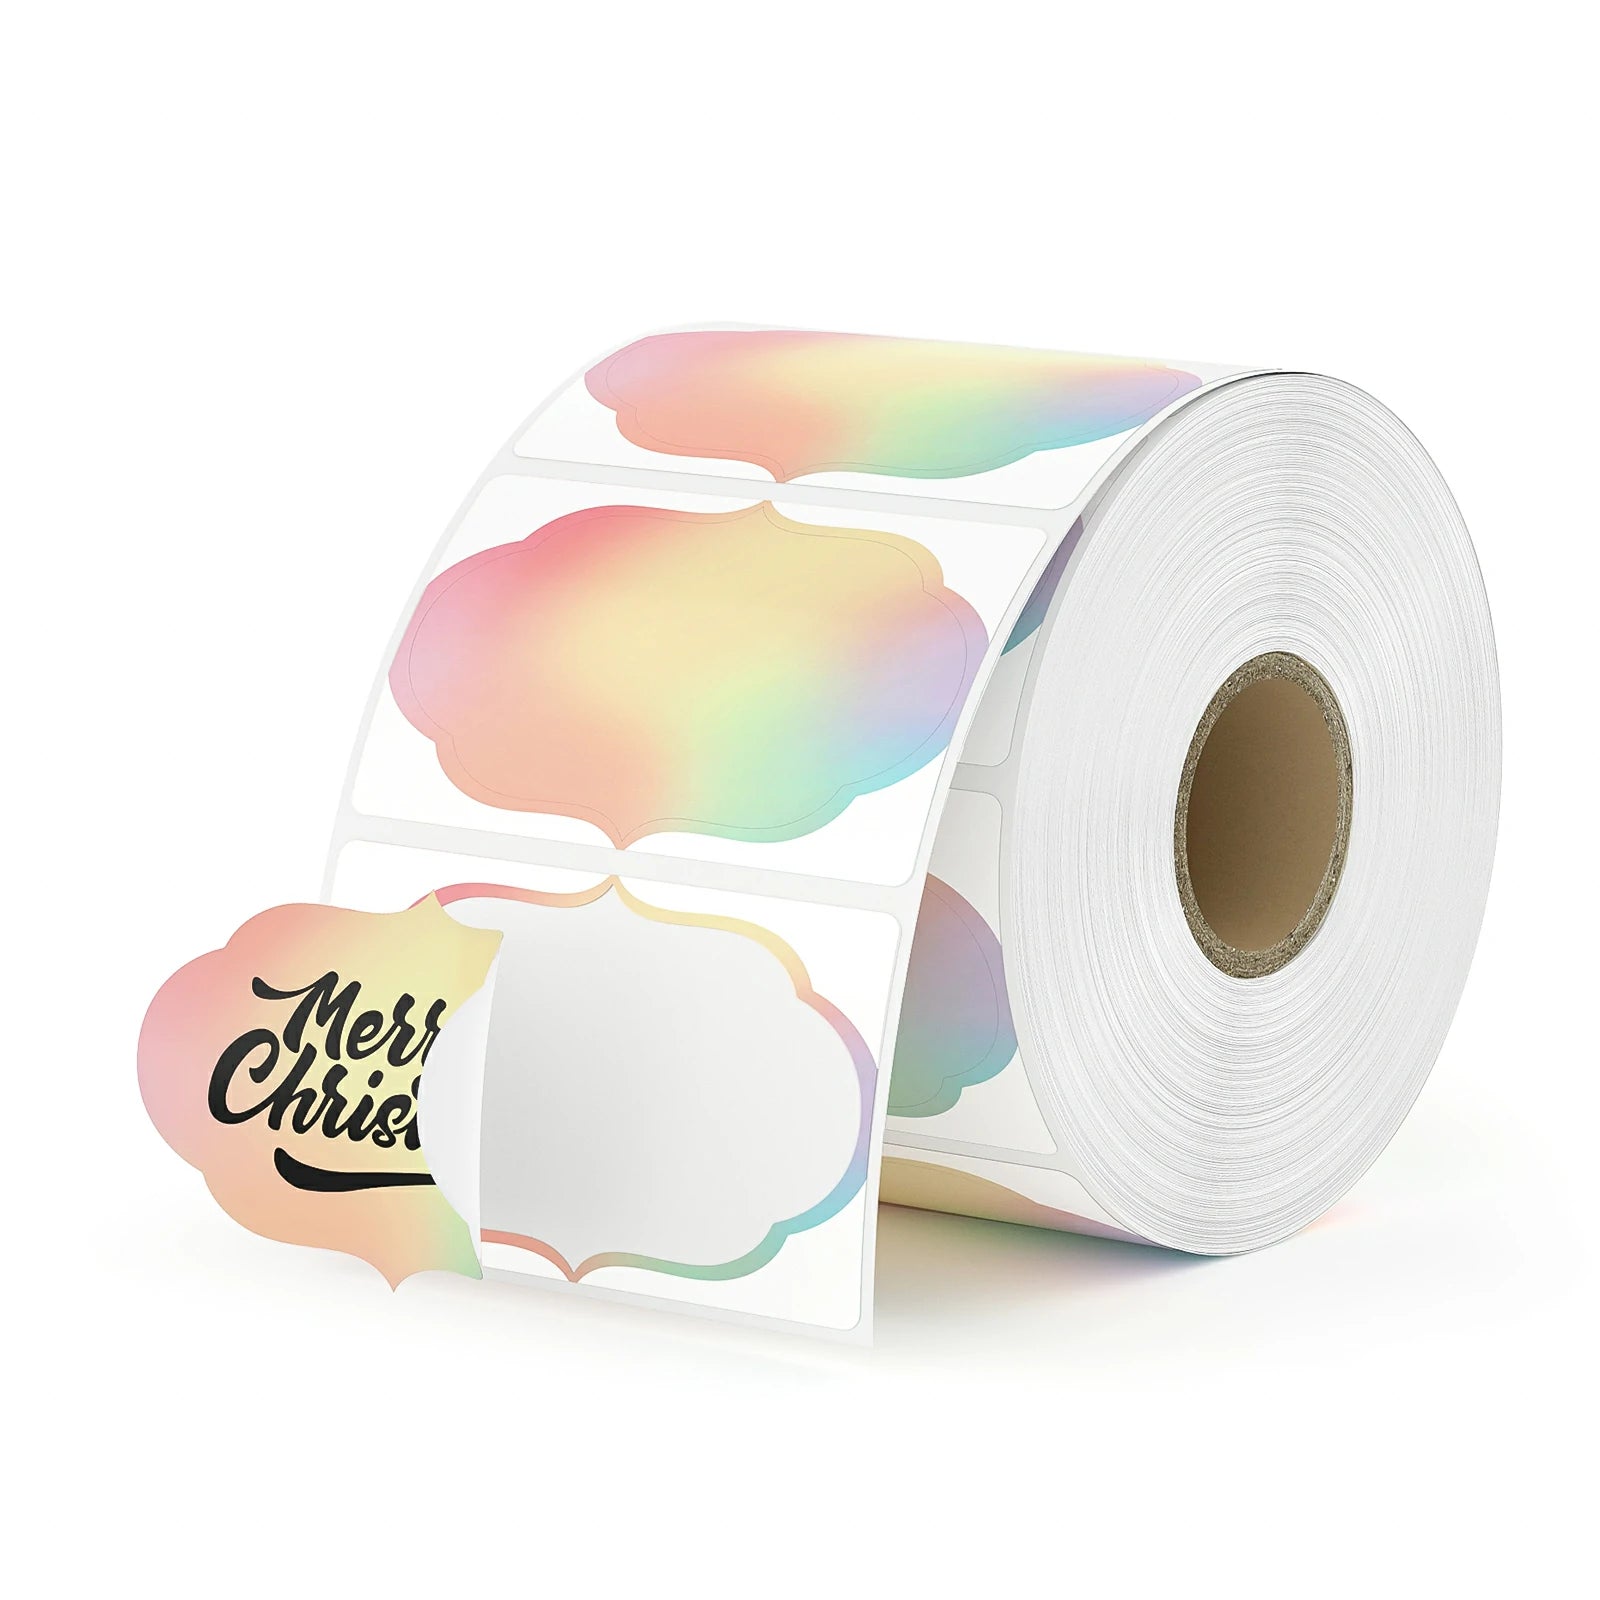 MUNBYN provides rainbow-colour fancy rectangle thermal labels.